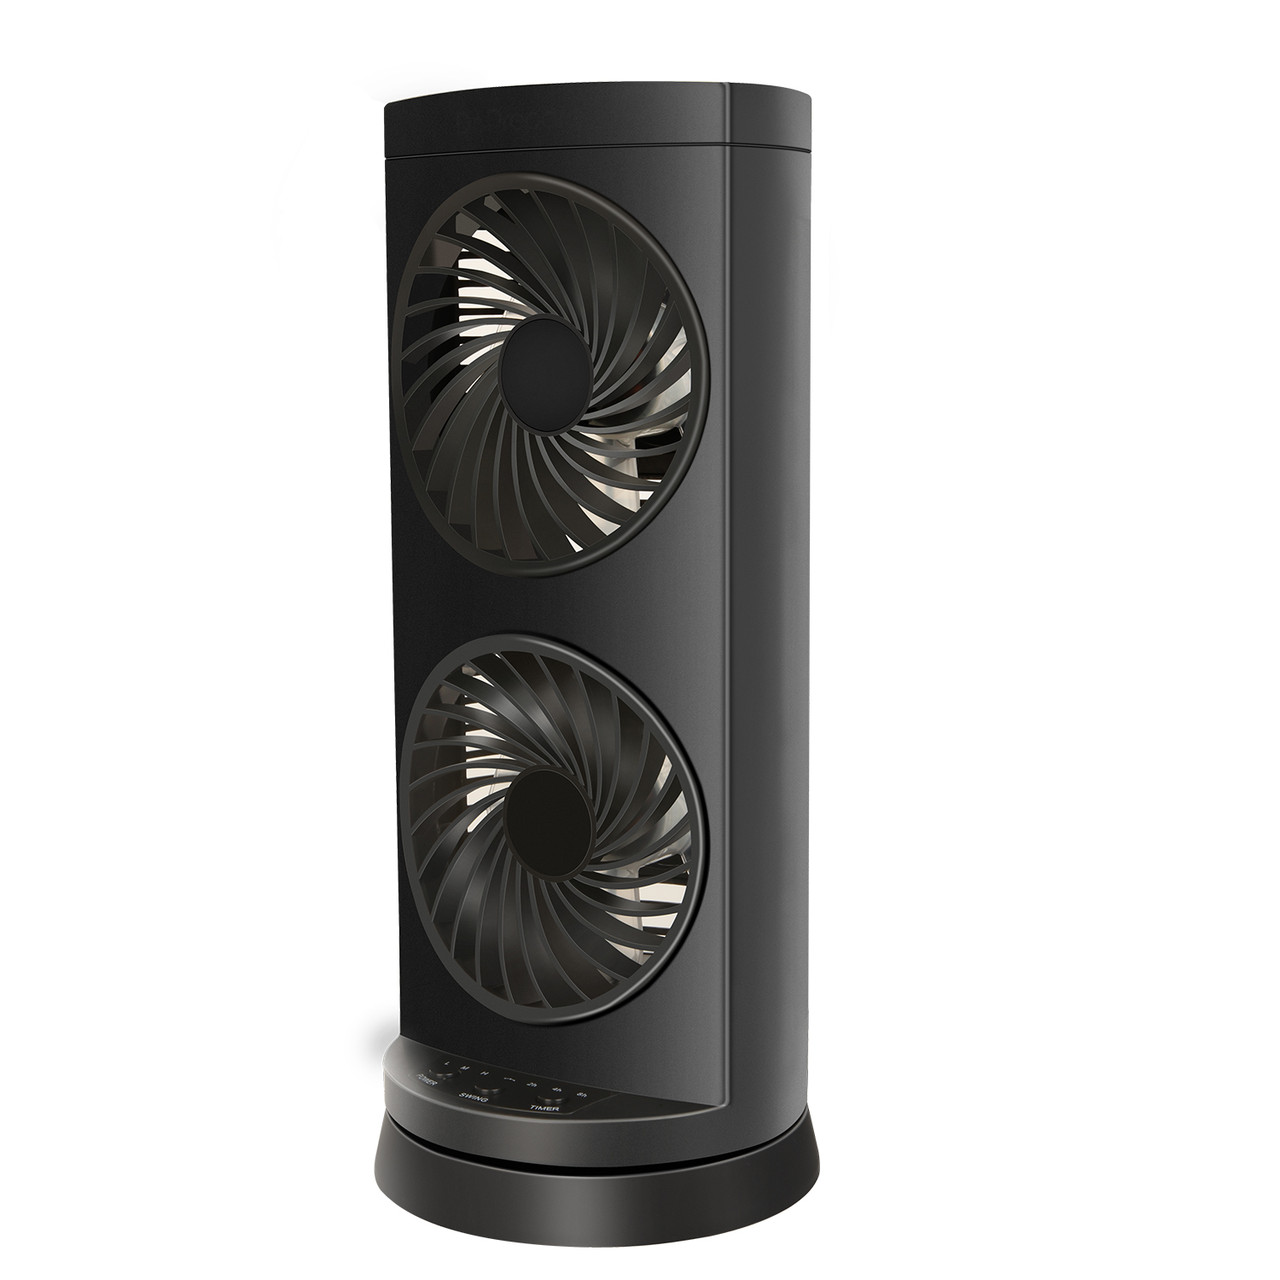 Dr. Prepare 13-inch Dual Oscillating Tower Fan Review: Small, powerful